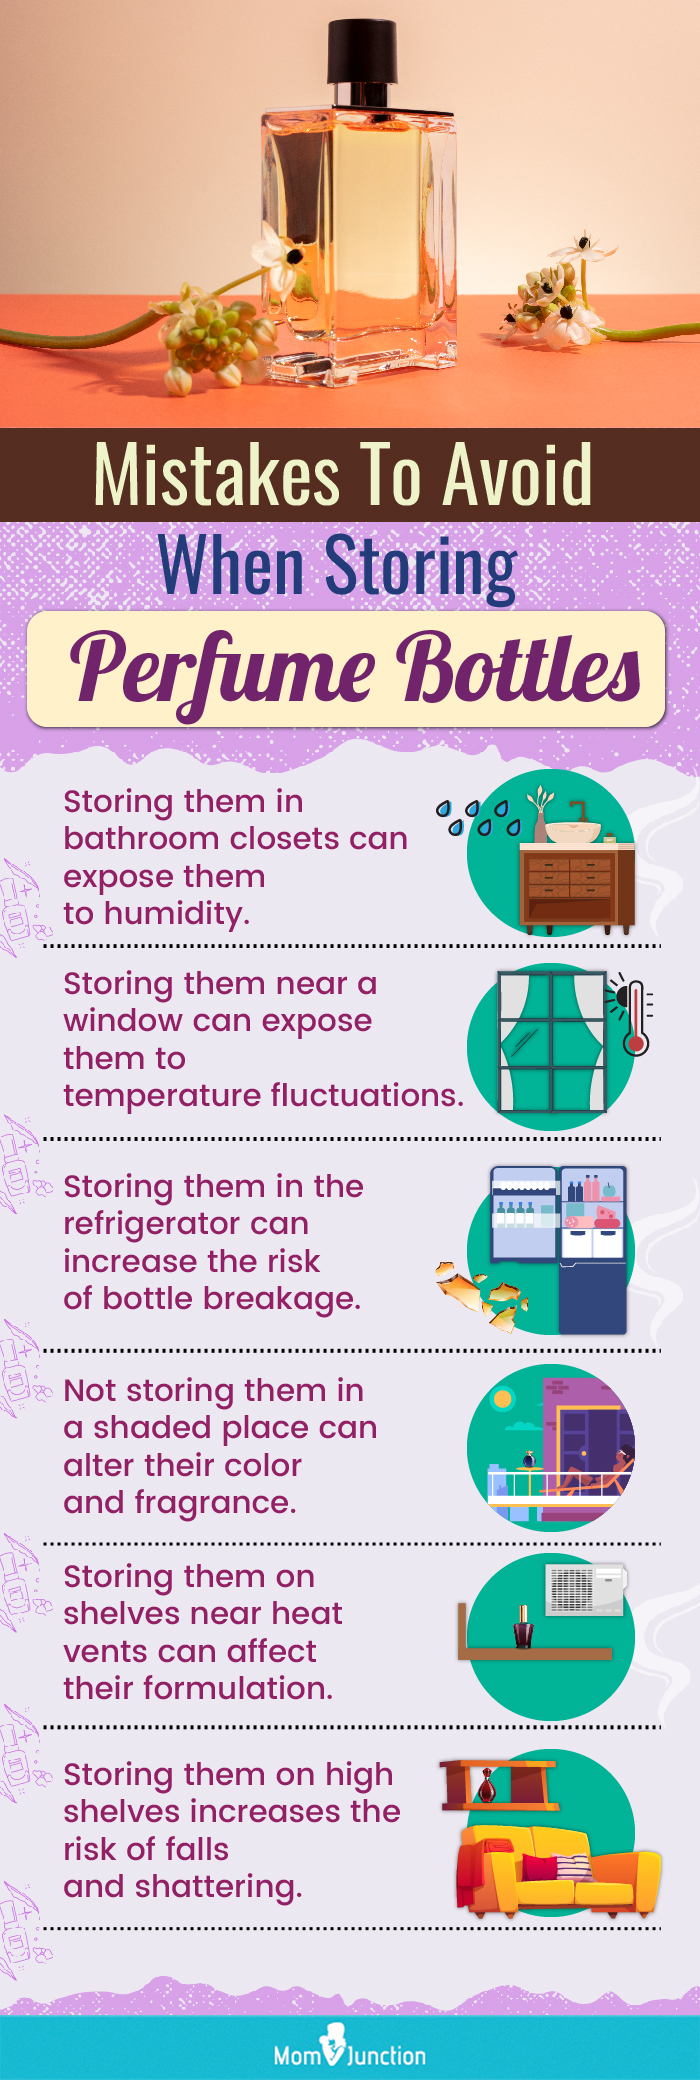 Mistakes To Avoid When Storing Perfume Bottles(infographic)